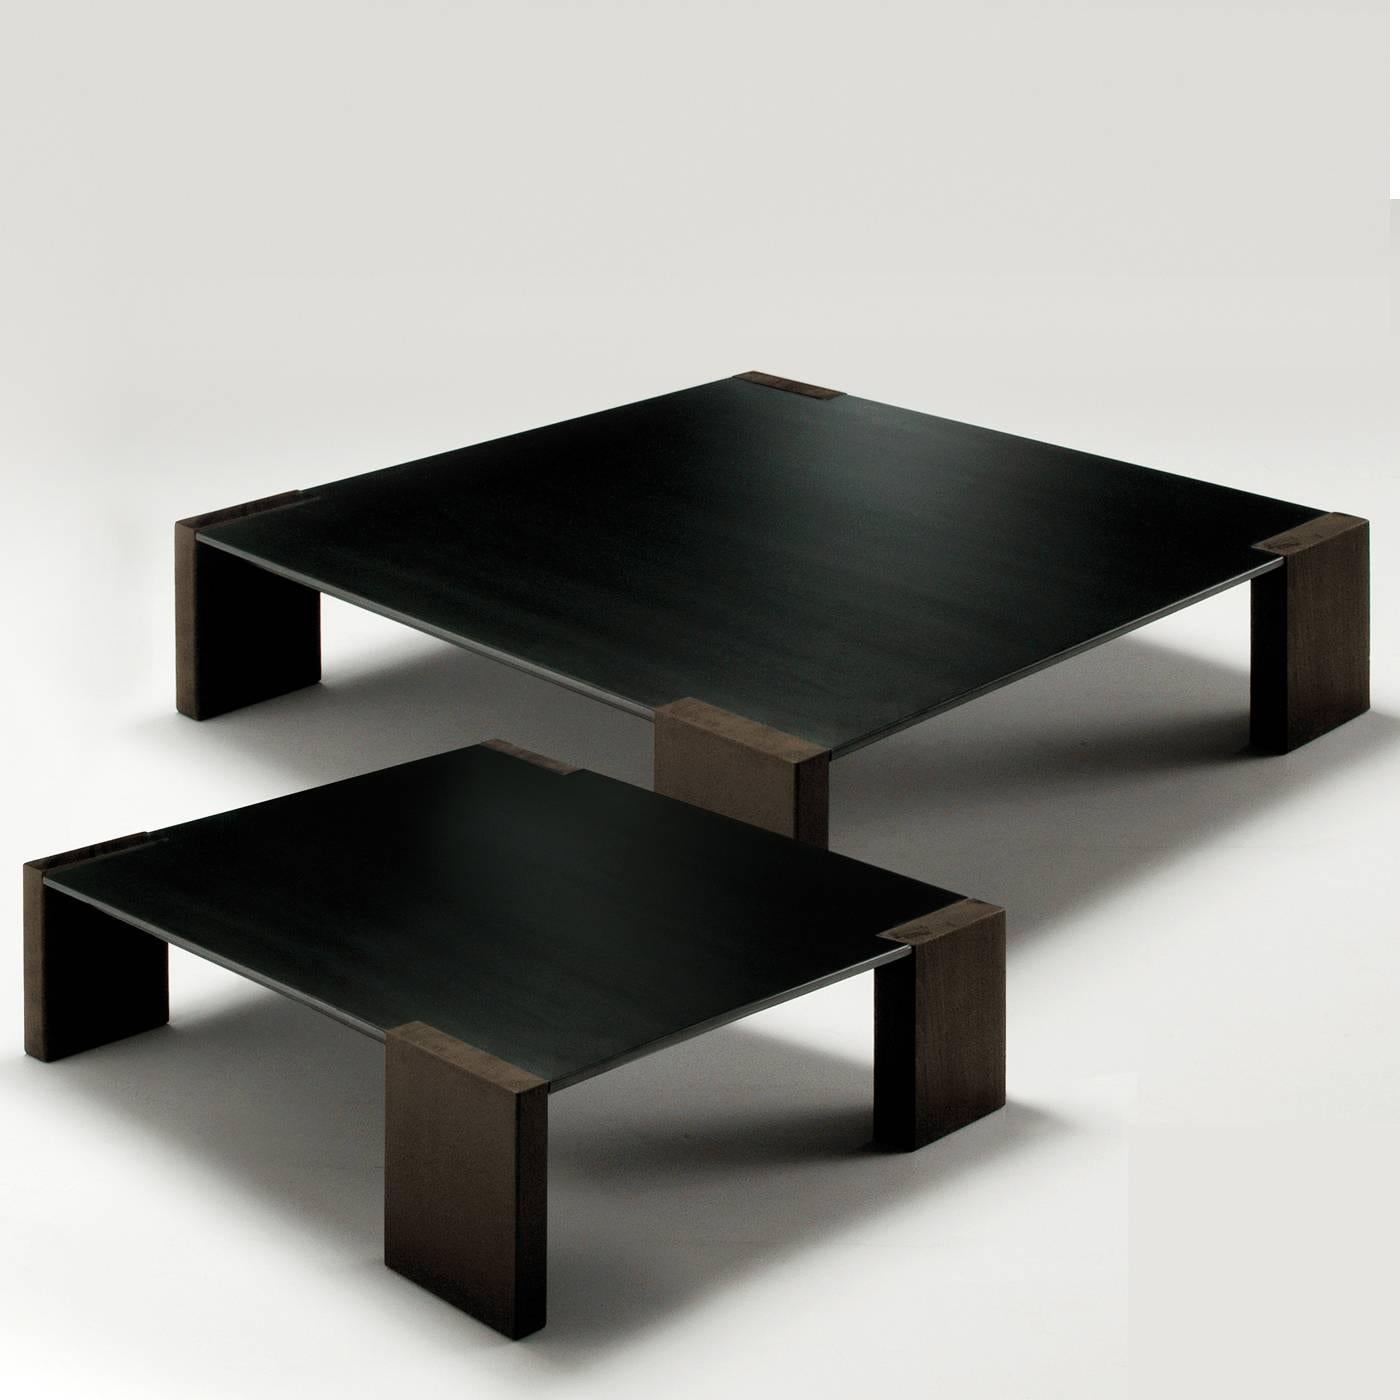 This beautiful square coffee table comes in two sizes. The tabletop is in natural steel, which has been specifically oxidized to stress the irregular black surfaces and characteristics of the raw material, then finished with a beeswax finish. The